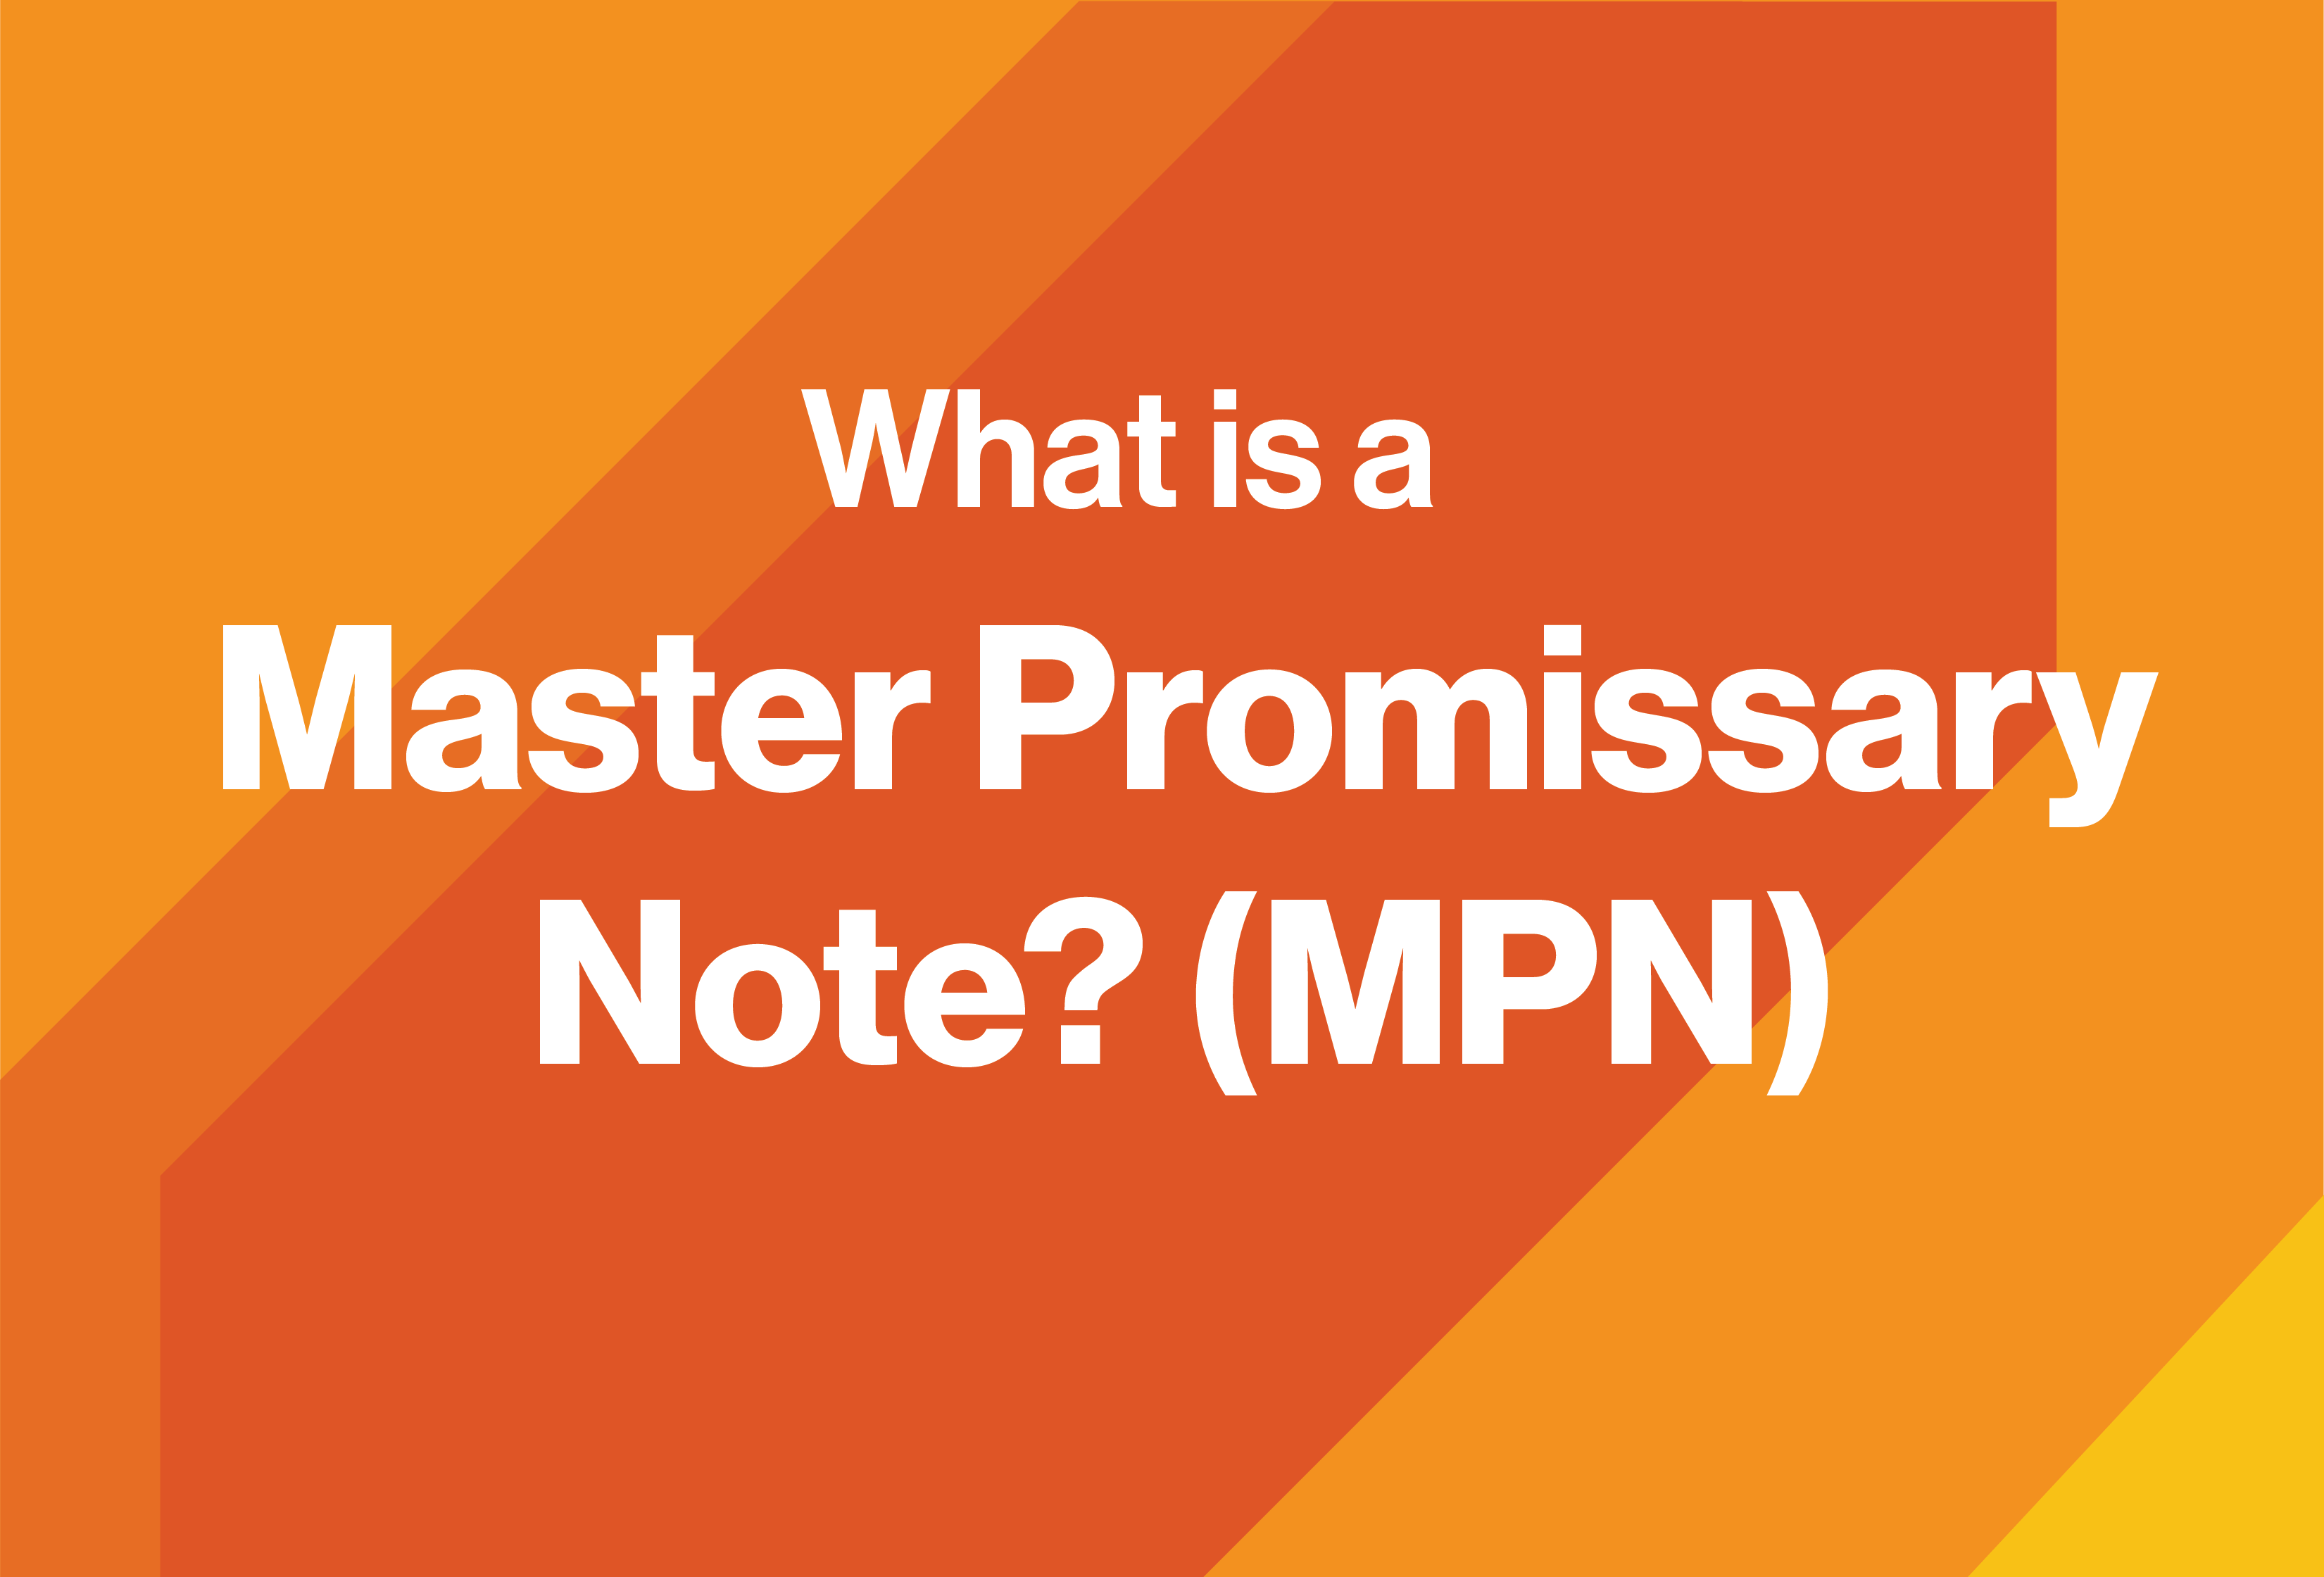 What is a Master Promissory Note?